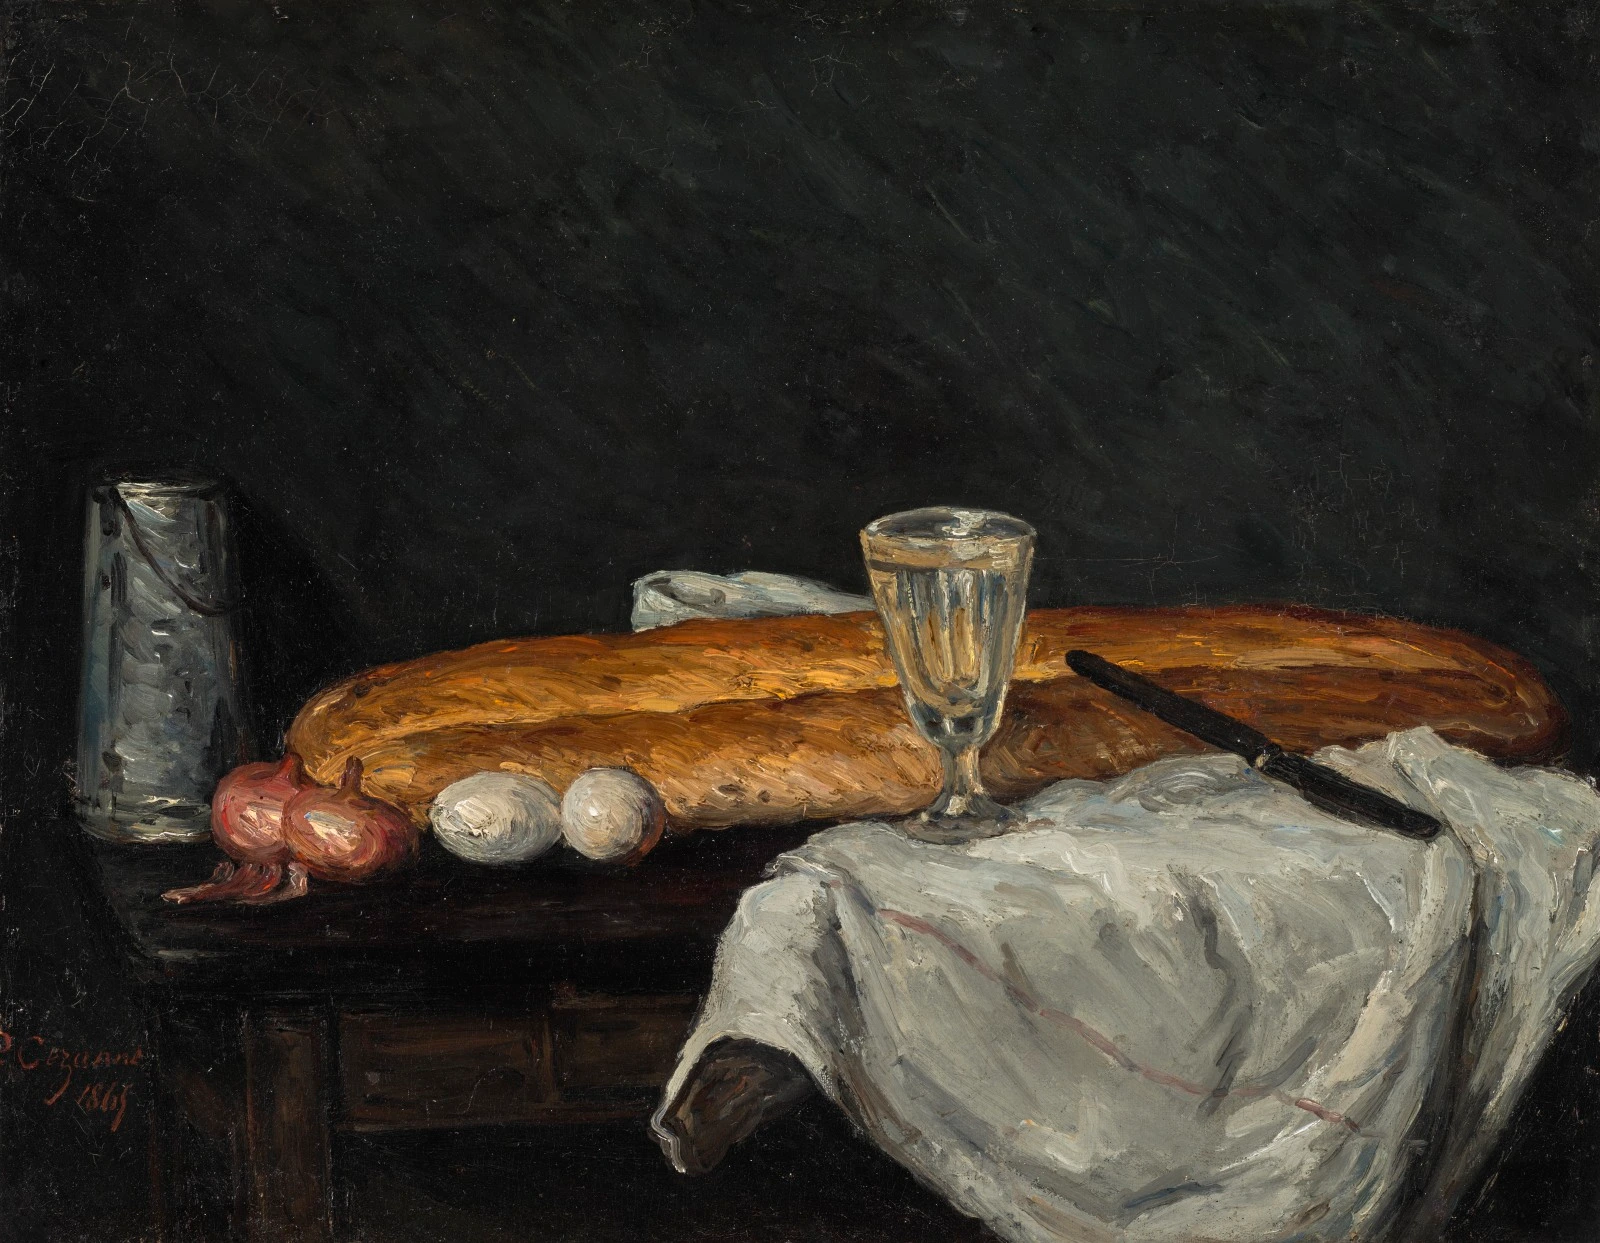 A still life featuring a loaf of bread, eggs, and a glass.